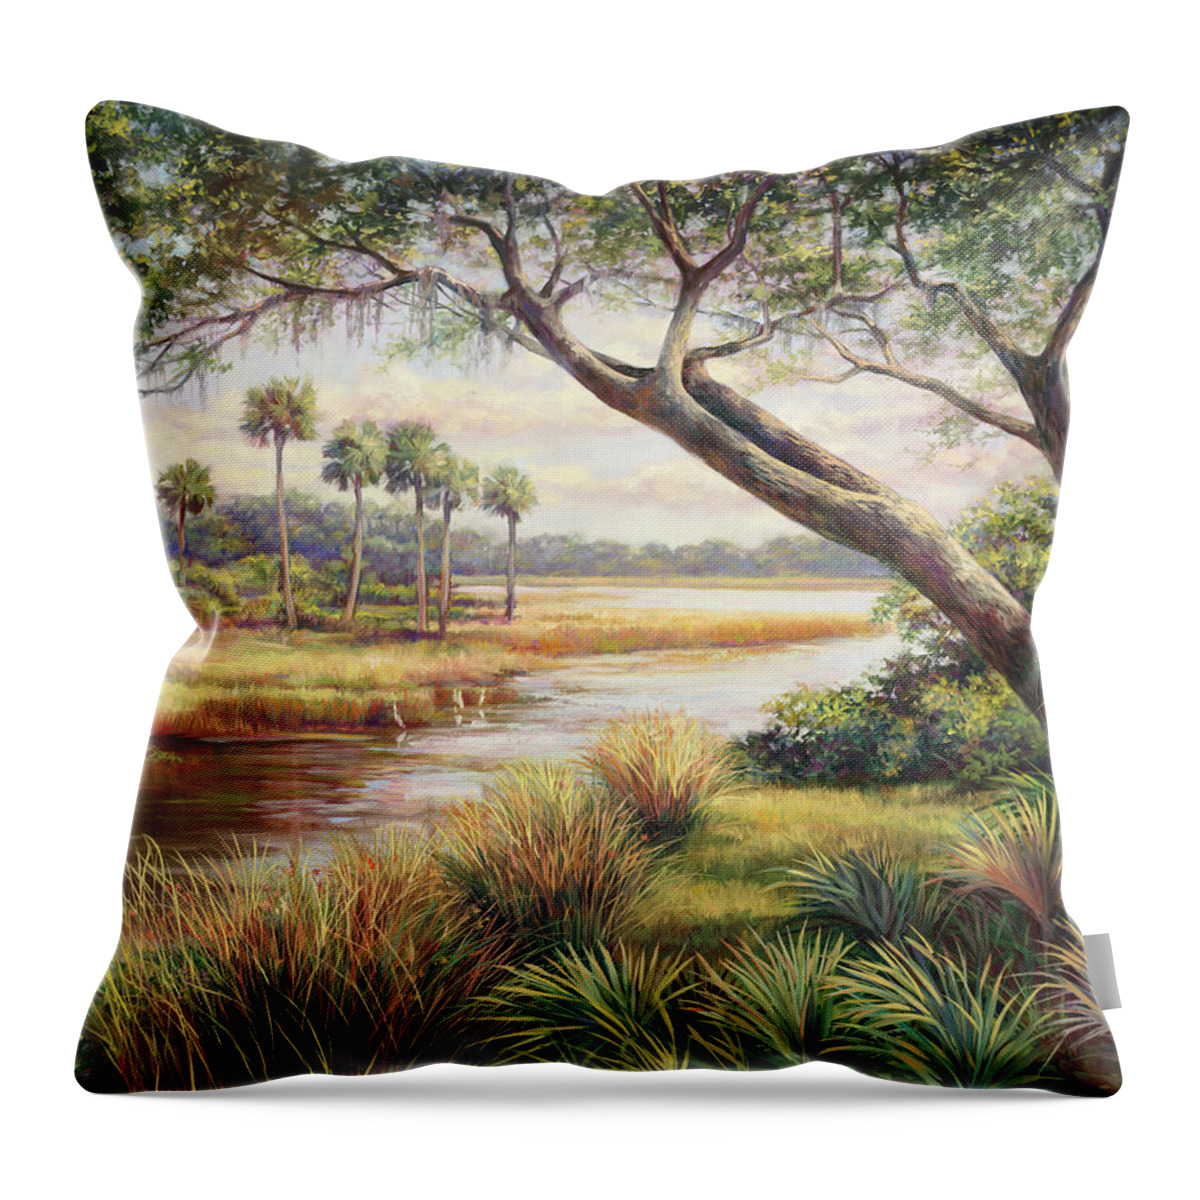 Scenic Throw Pillow featuring the painting Everglades Afternoon by Laurie Snow Hein